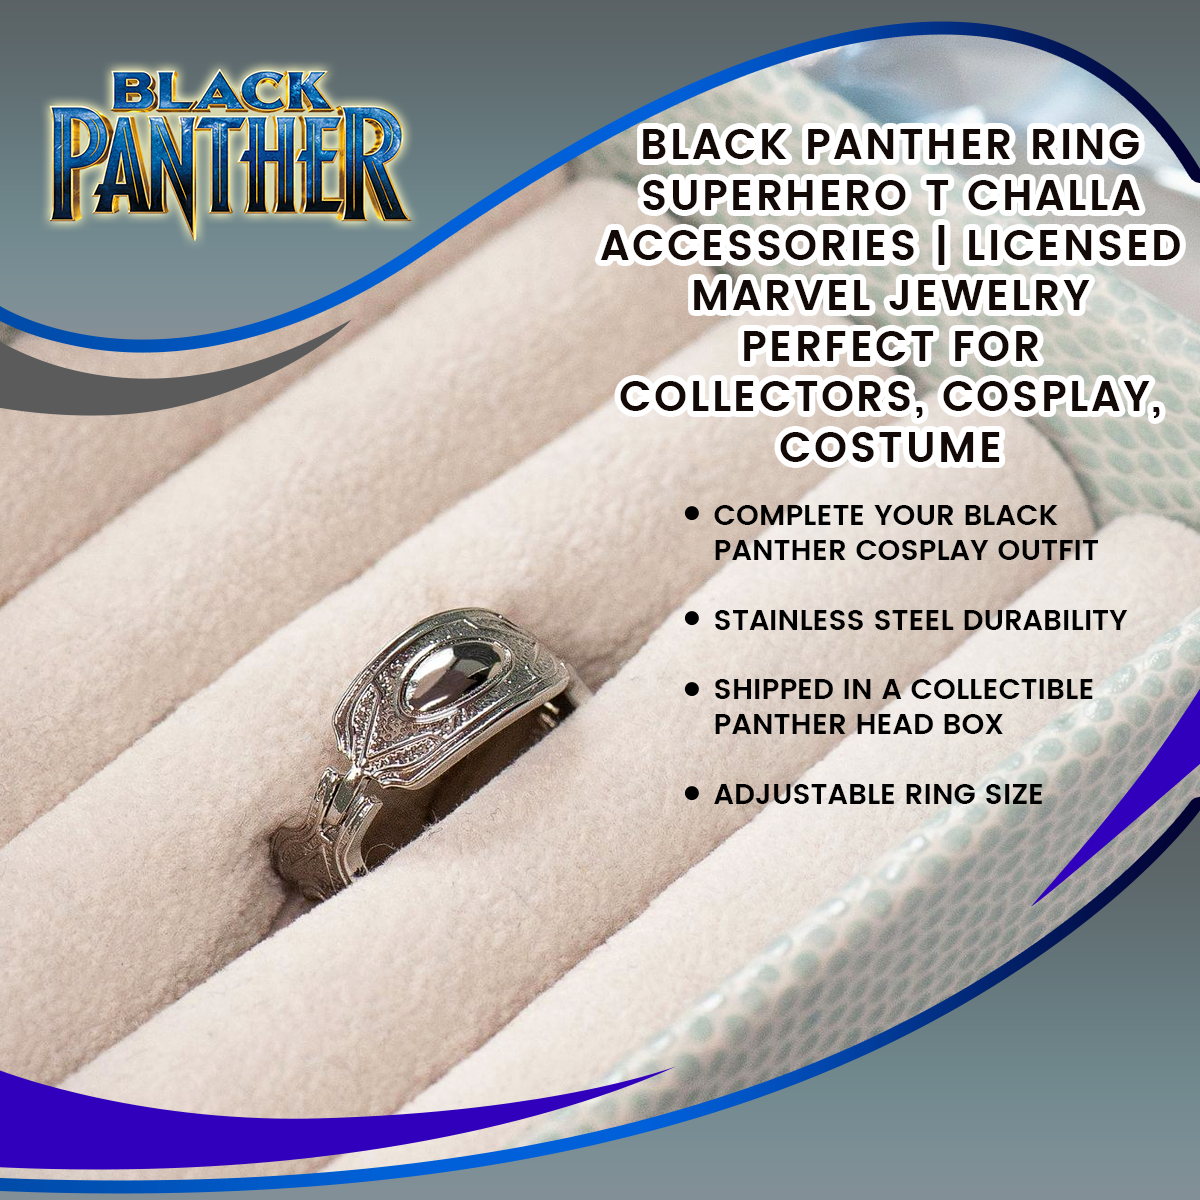 Black Panther Ring | Superhero T Challa Accessories | Licensed Marvel Jewelry | Perfect for Collectors, Cosplay, Costume